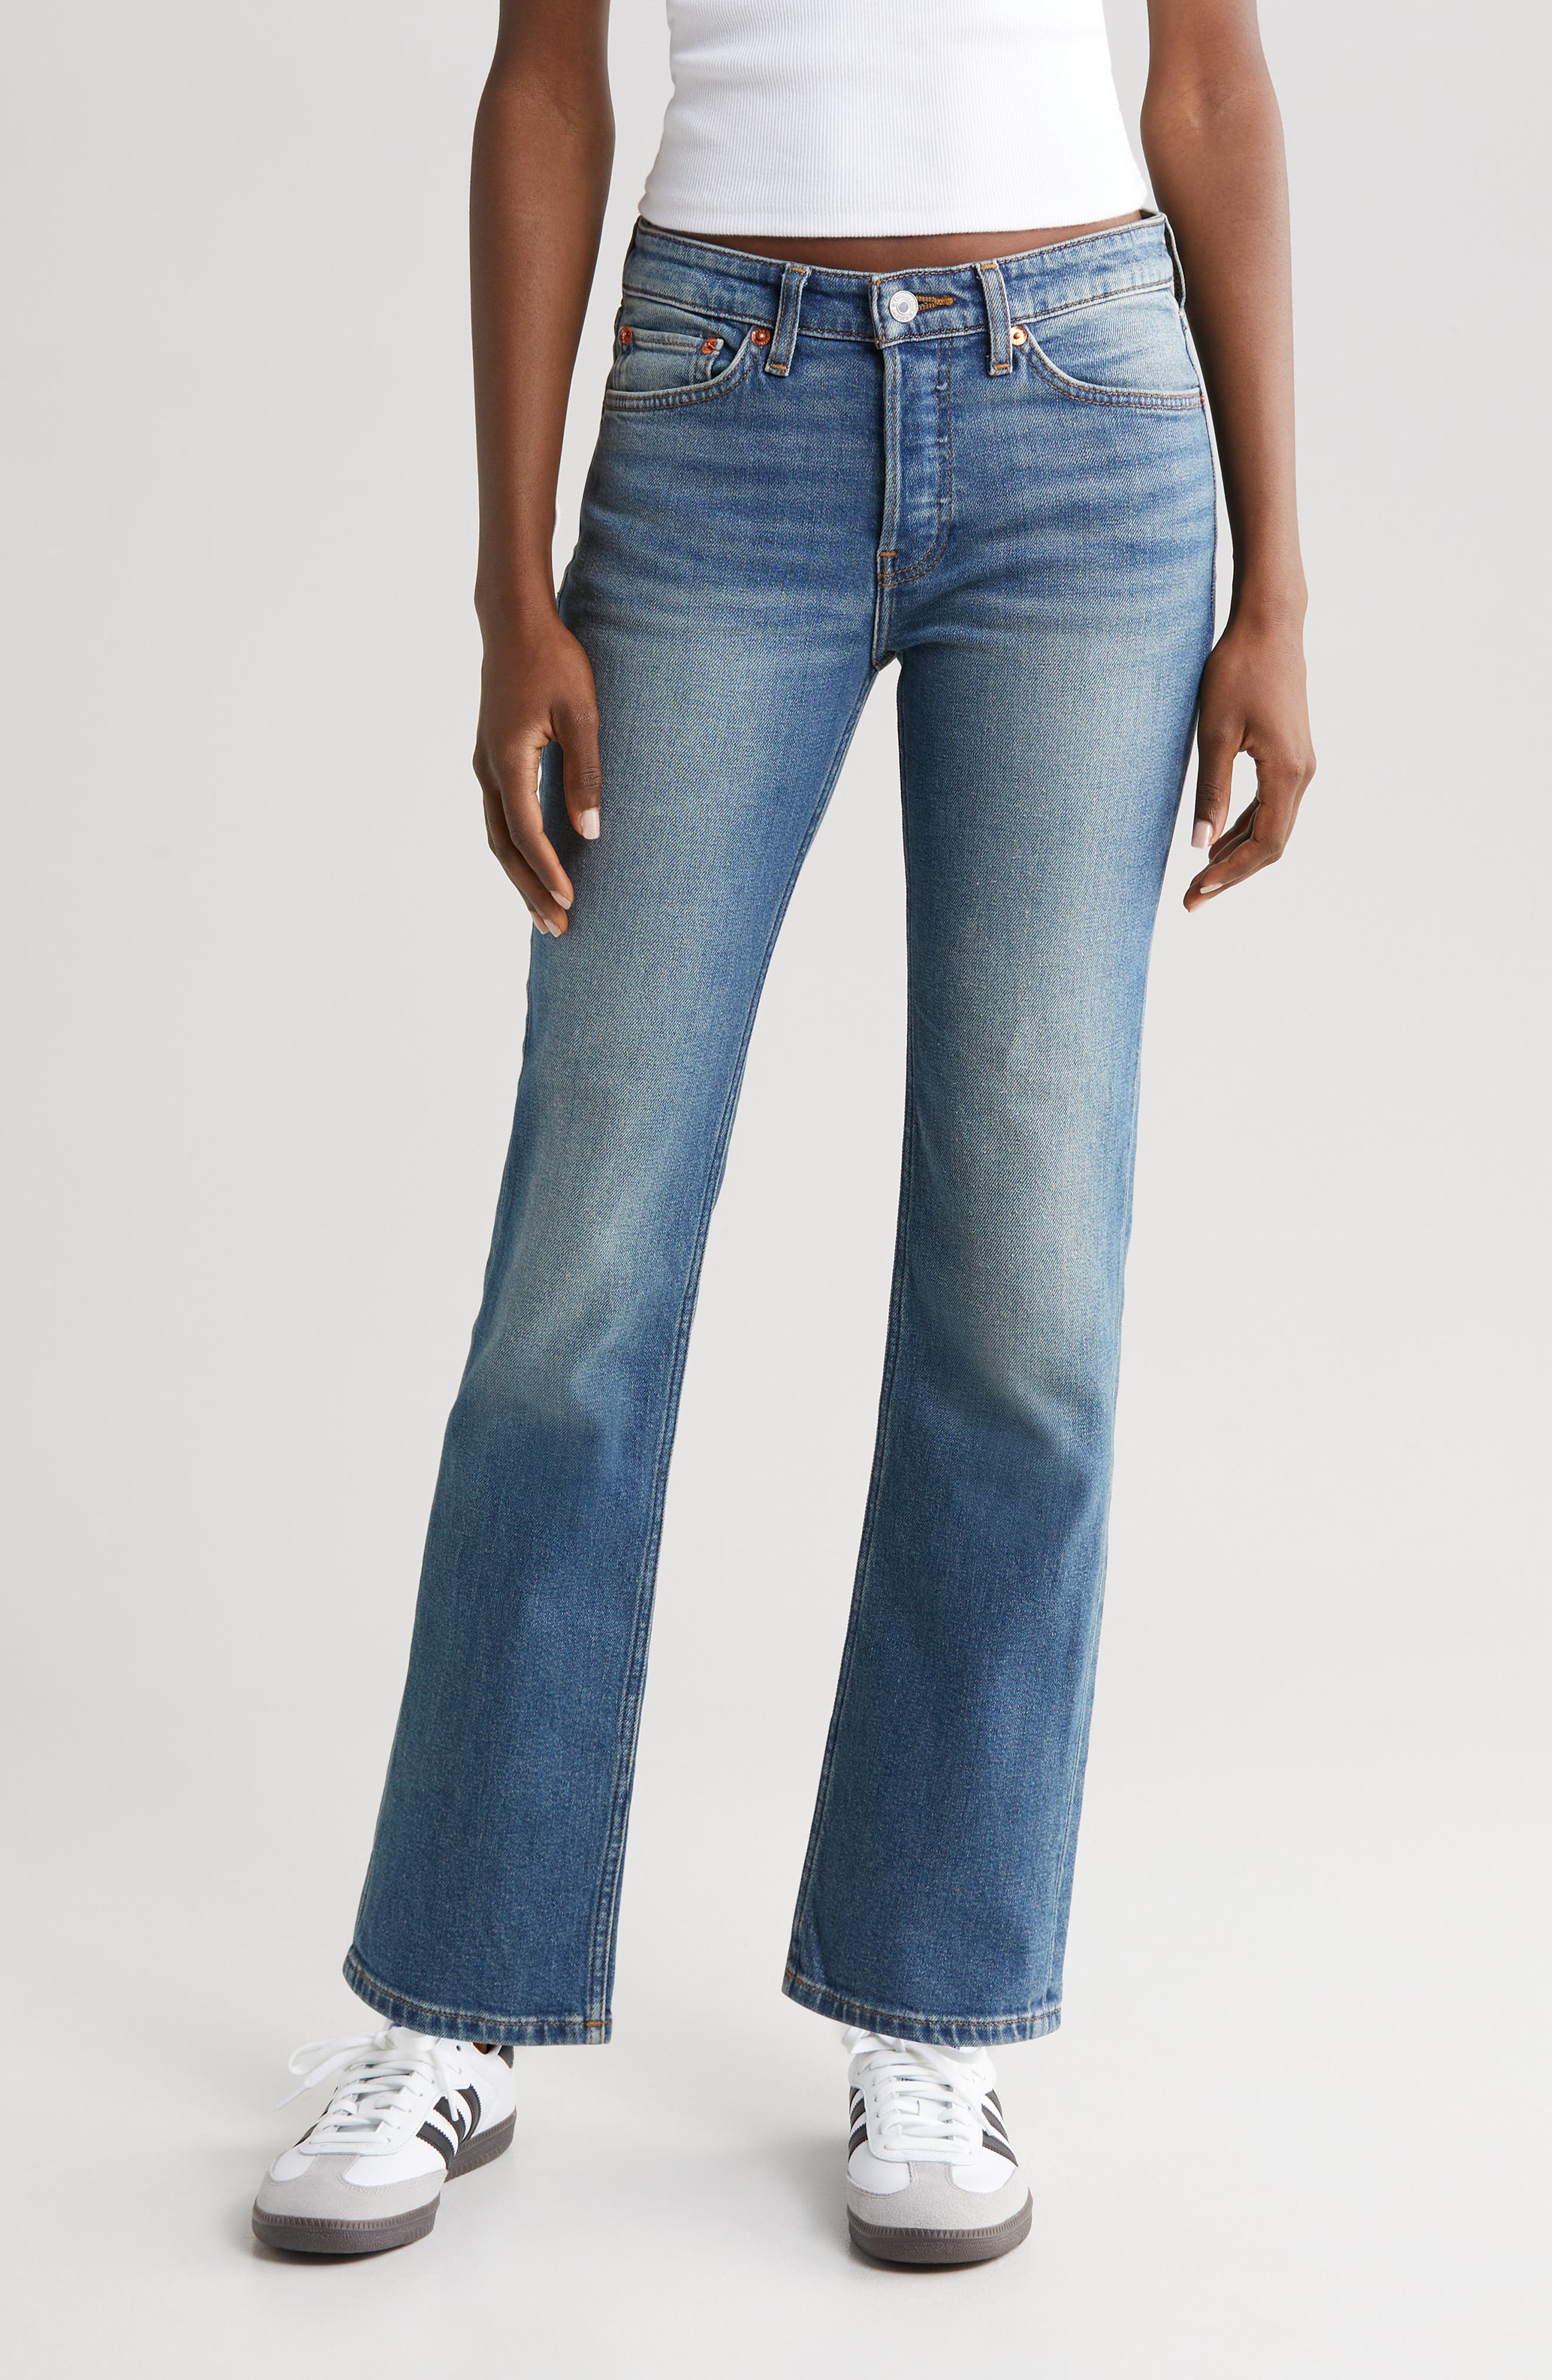 RE/DONE Baby Boot flared jeans - Blue